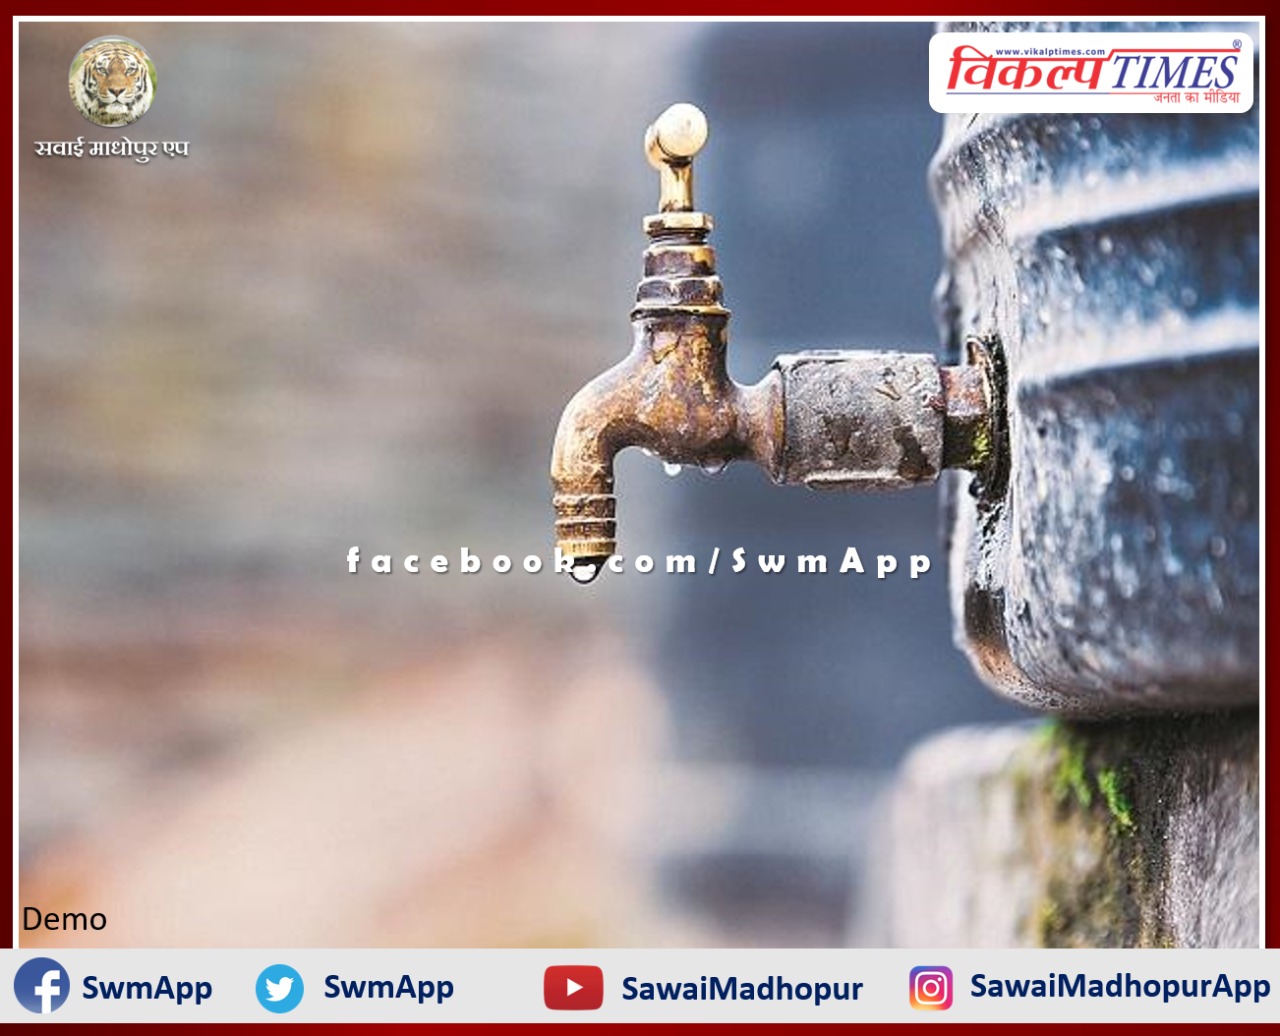 Drinking water consumers will get exemption from interest and penalty on depositing dues by March 31 in sawai madhopur